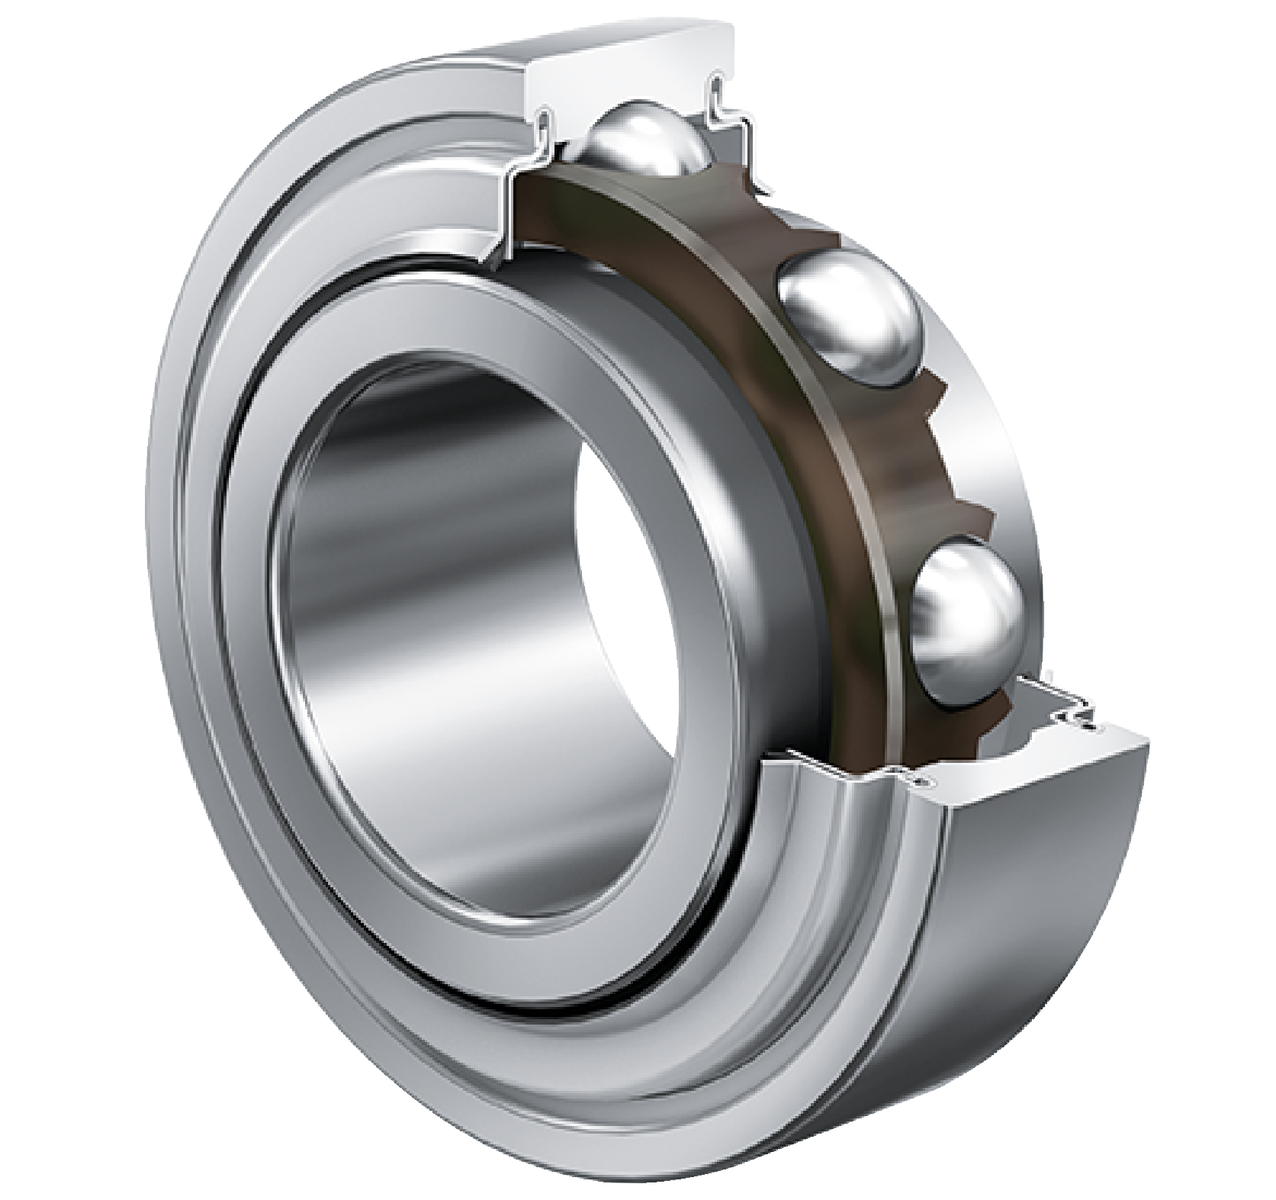 Radial Insert Ball Bearing 2..-KRR, Cylindrical Outer Ring, Inner Ring for Fit, R Seals on Both Sides 203-XL-KRR-AH05